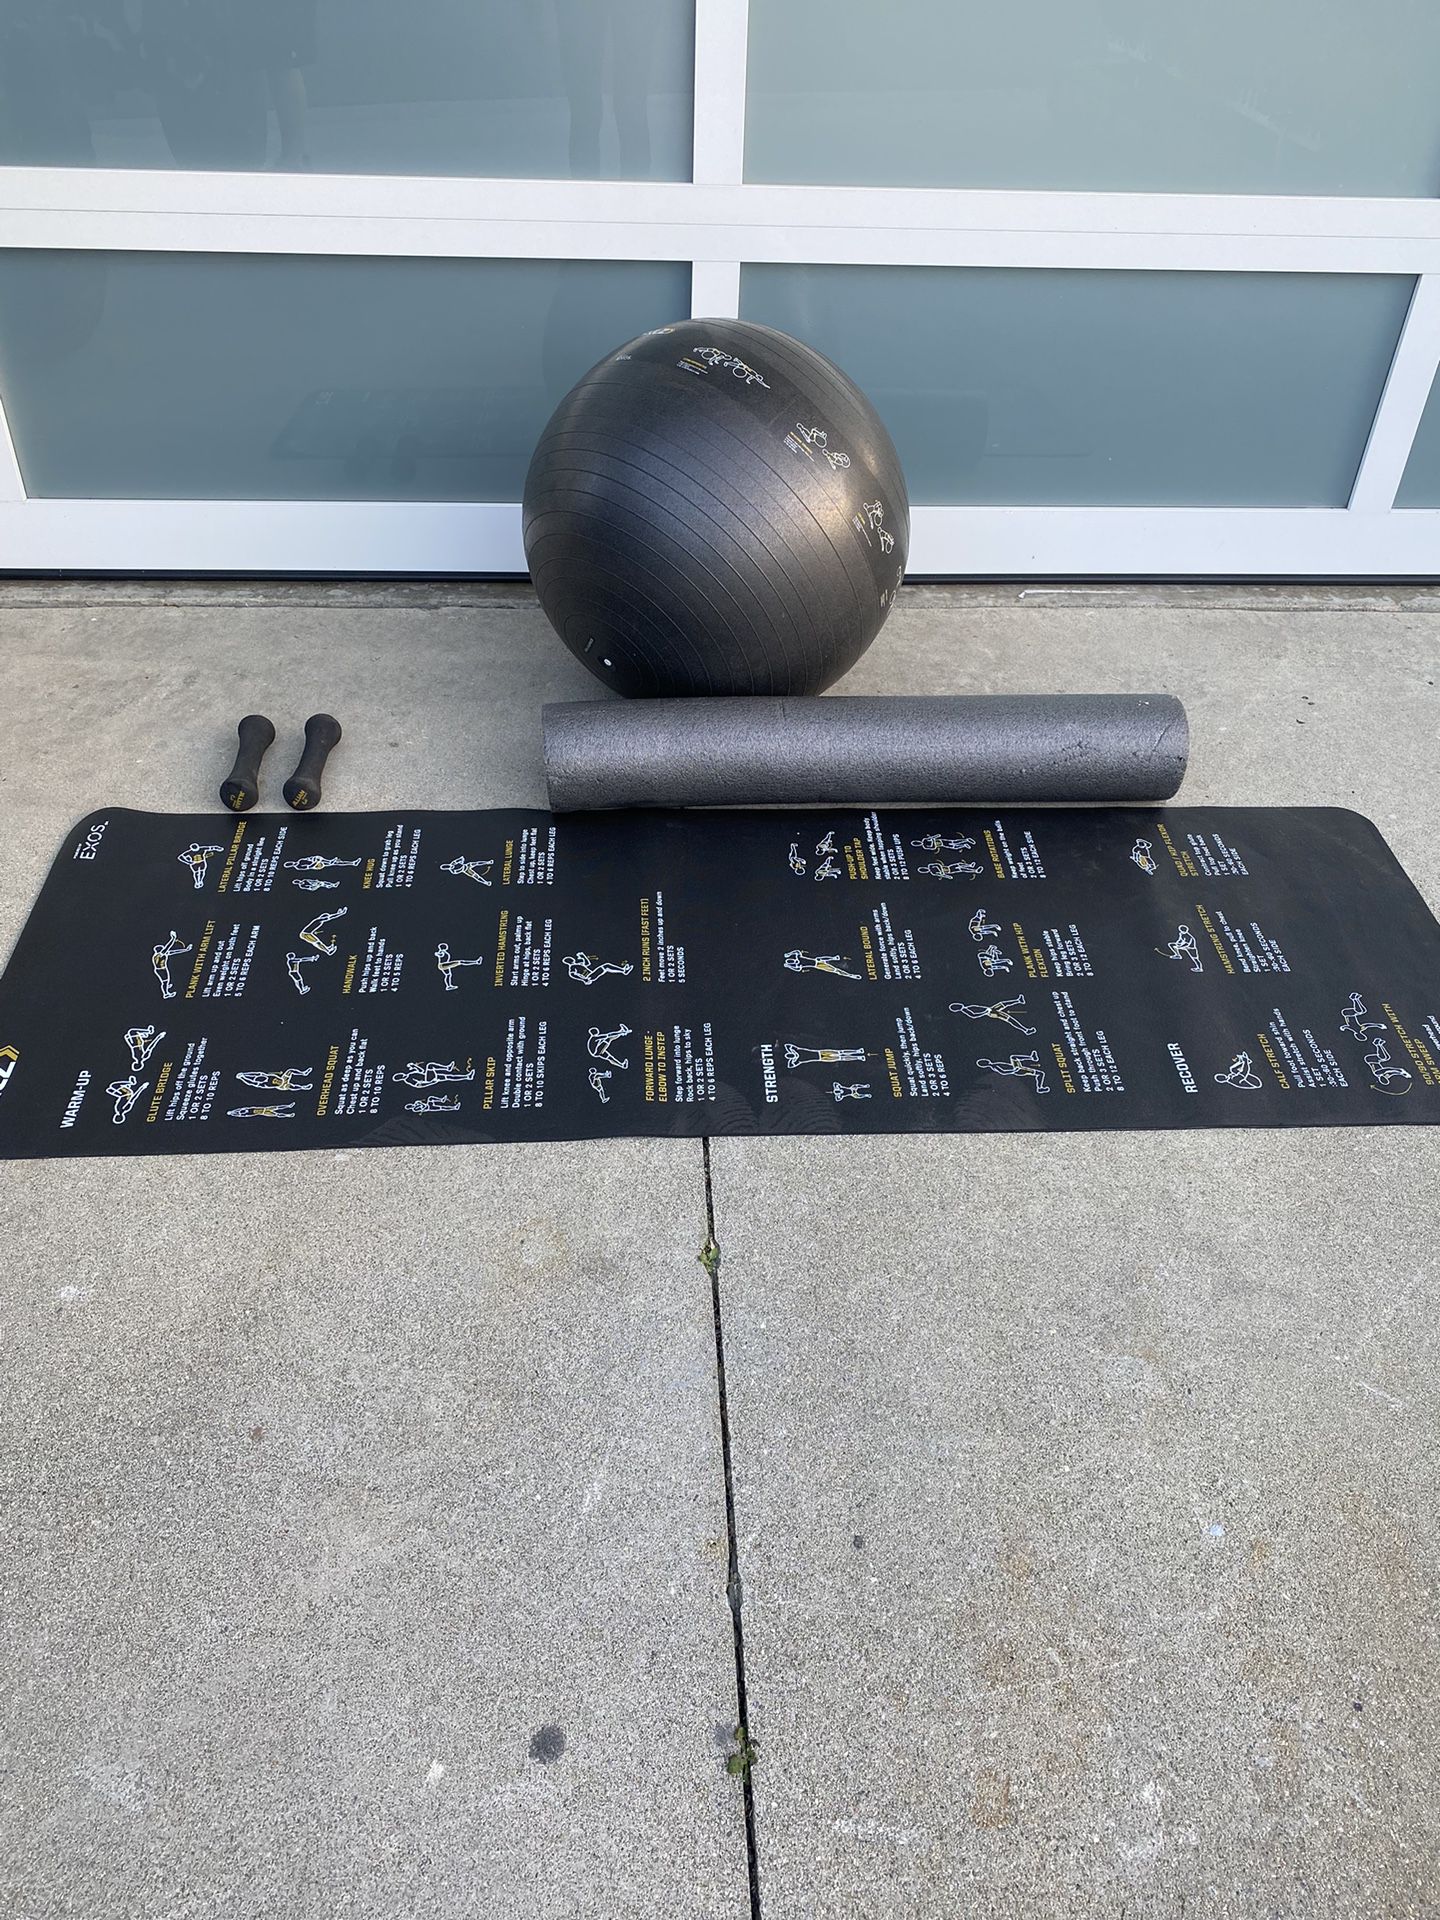 SKLZ Sport Exercise Ball with Self-Guided Workout Illustrations and exercise mat and dumbbell set